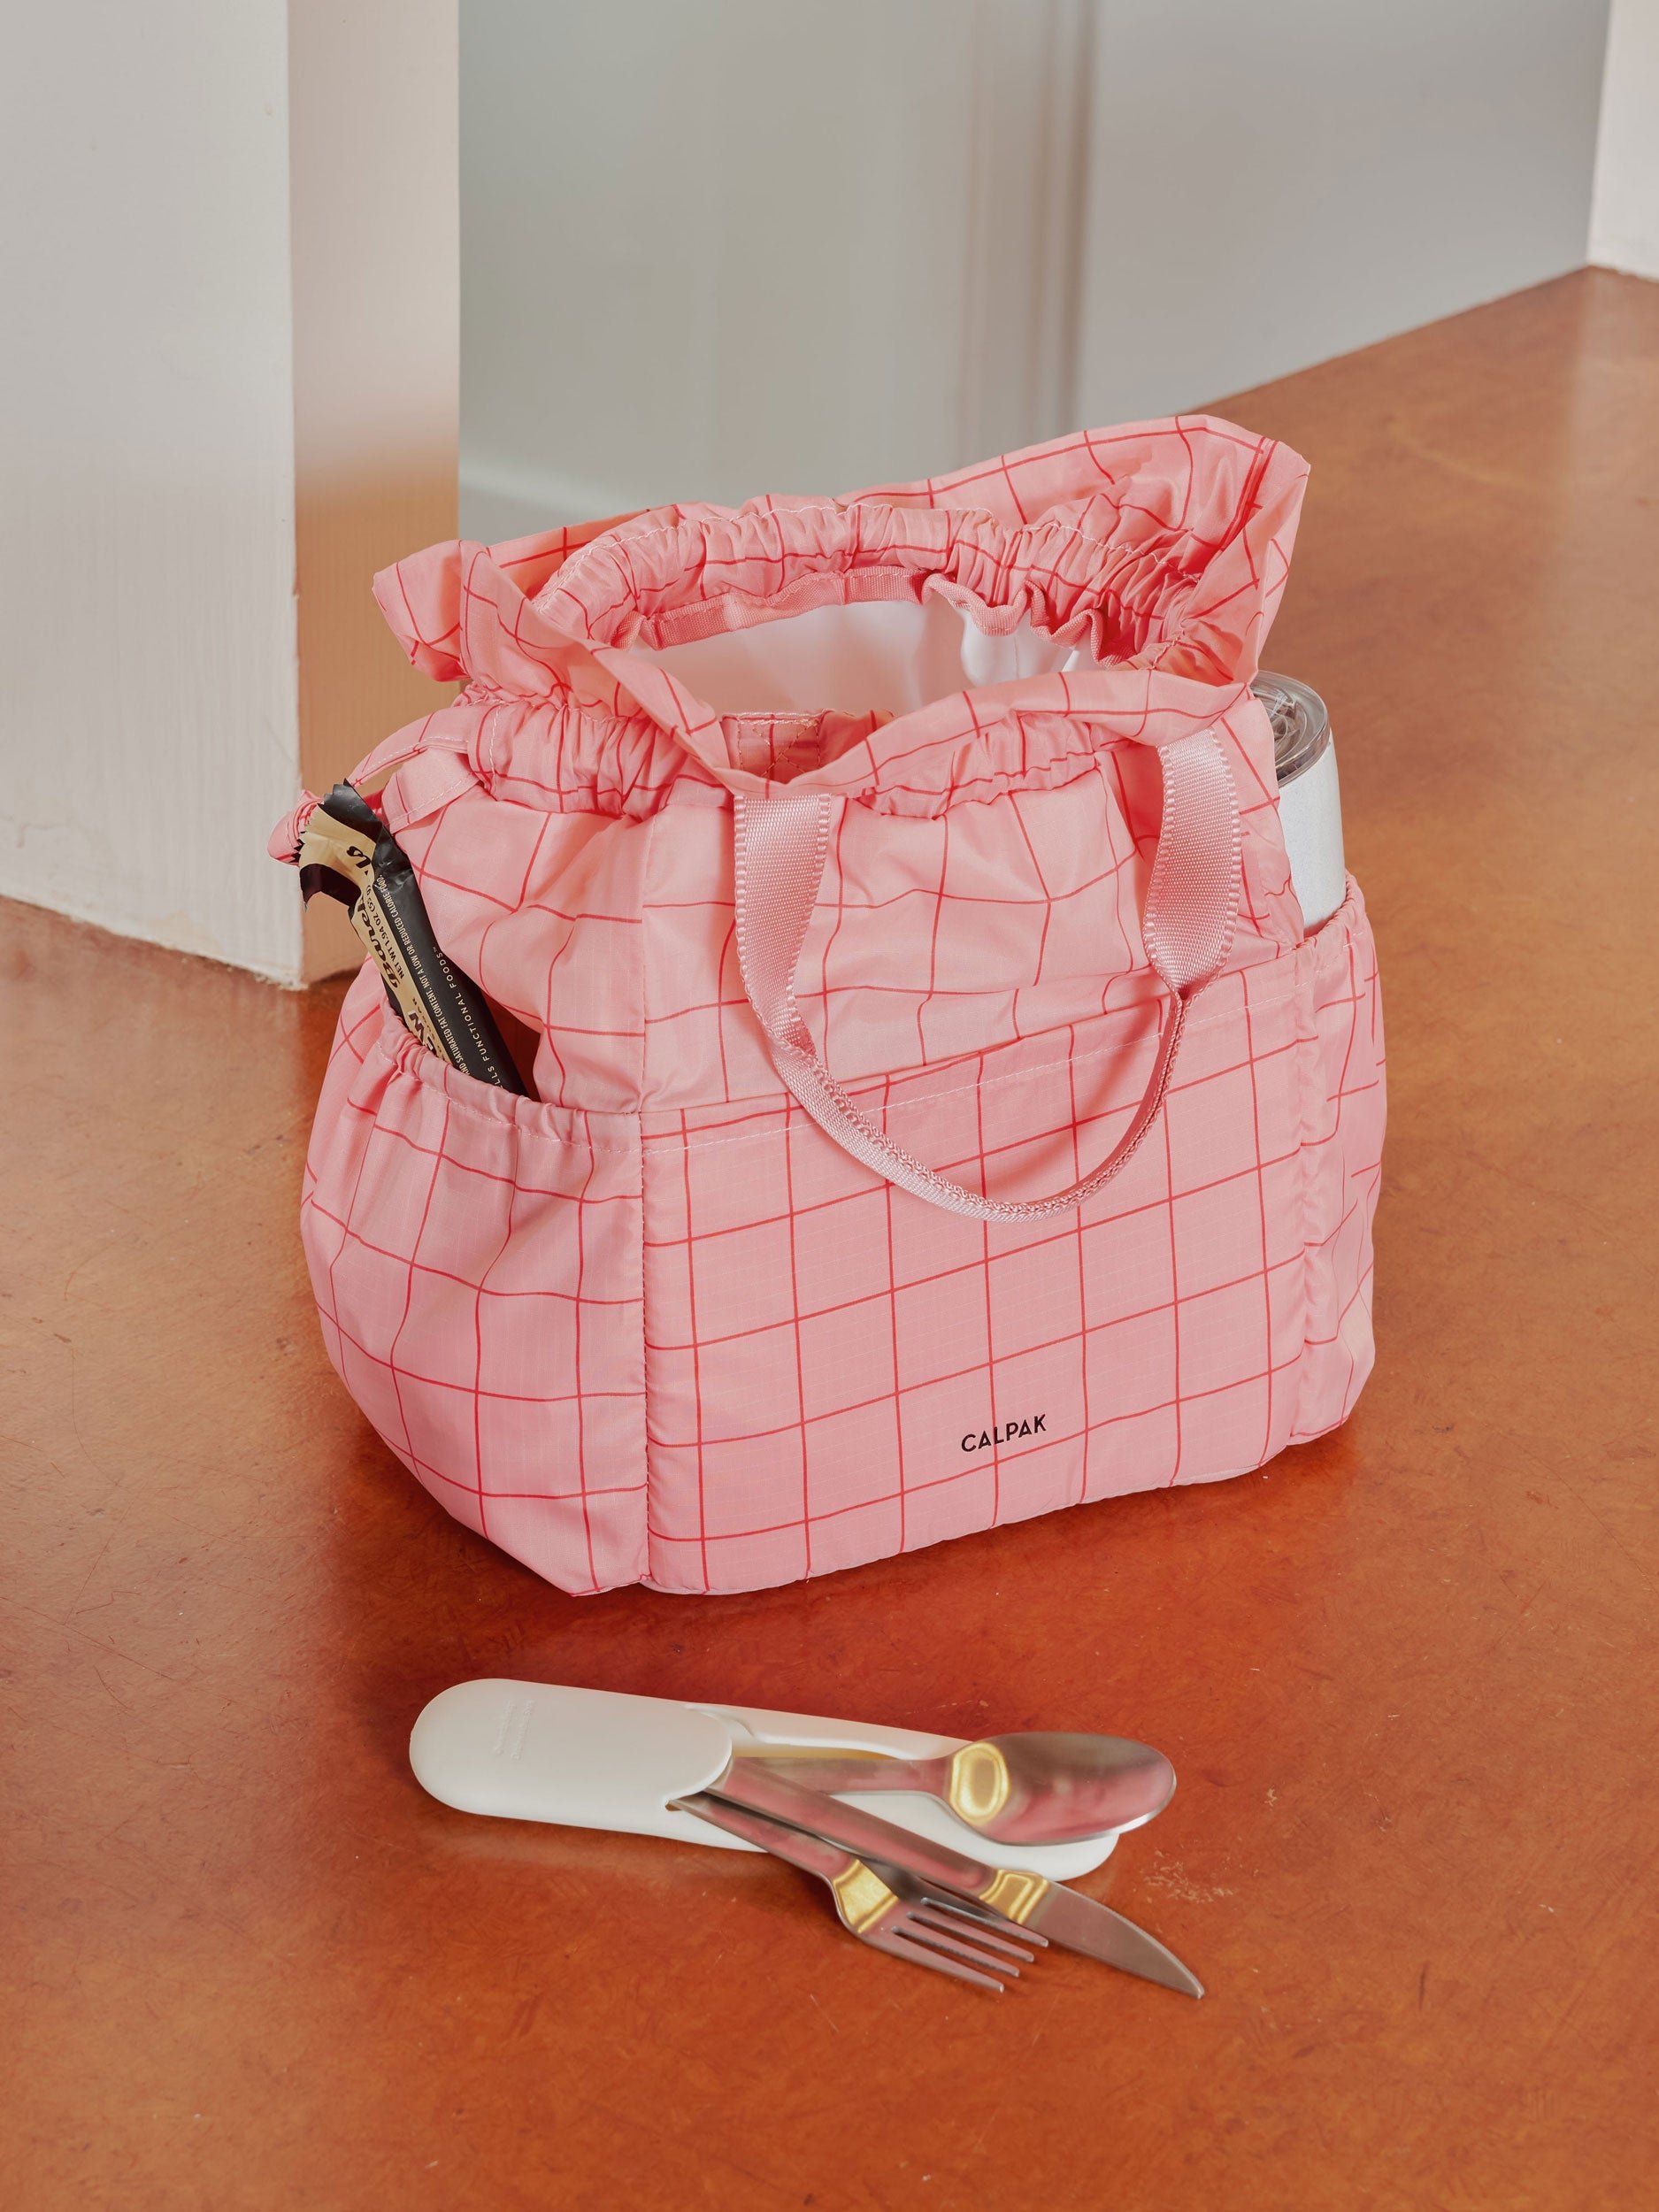 CALPAK Insulated Lunch Bag with dual top handles and side pockets in pink grid print